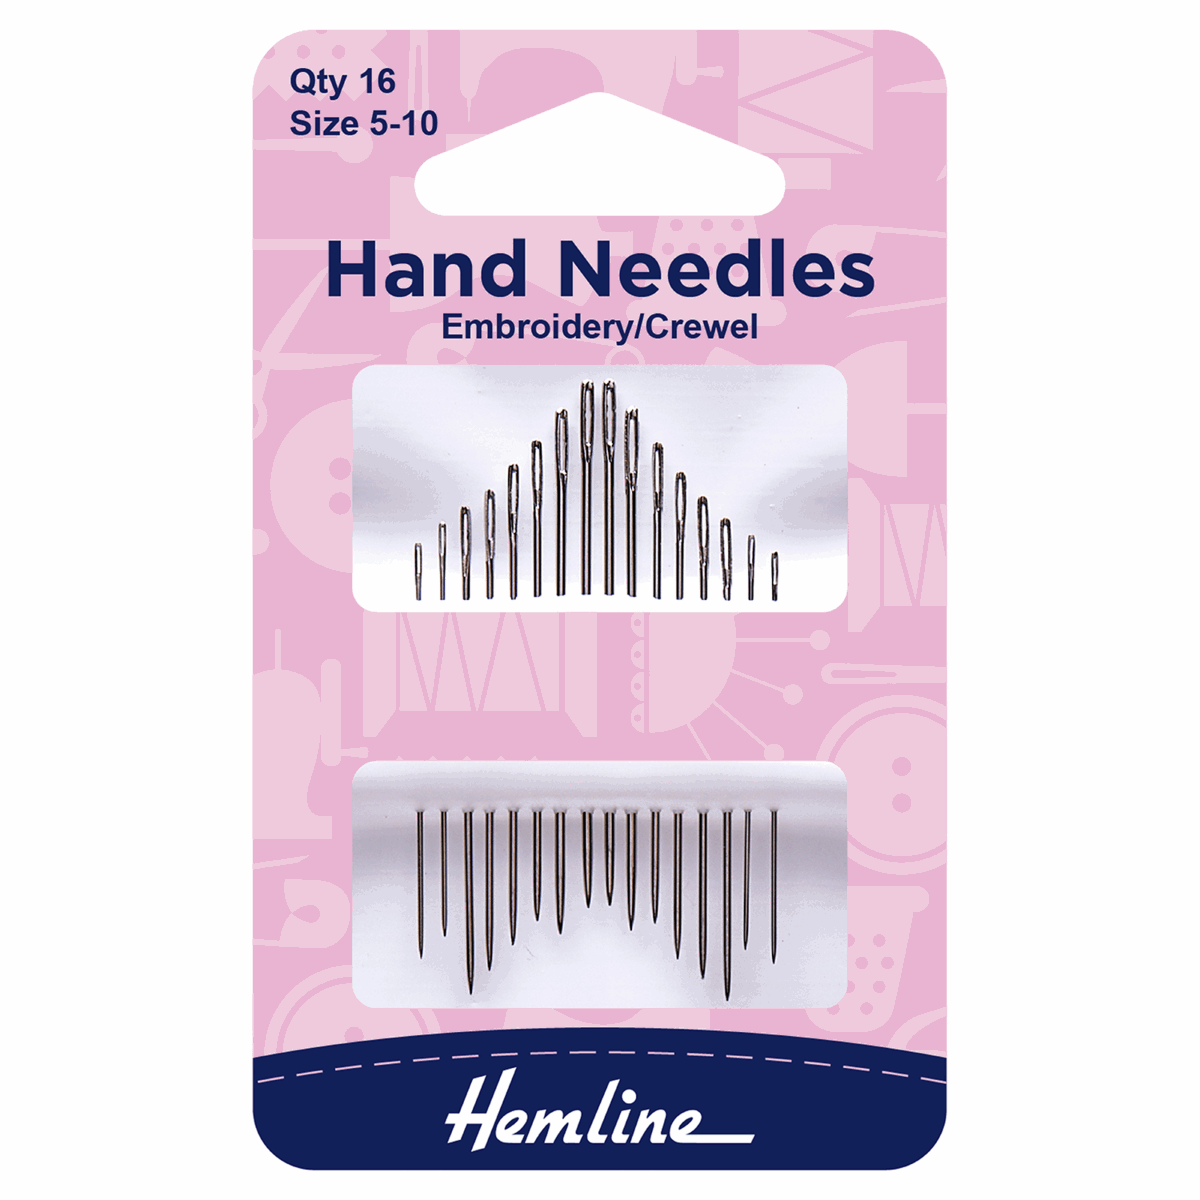 Hemline Hand Sewing Needles: Embroidery/Crewel: Size 5-10